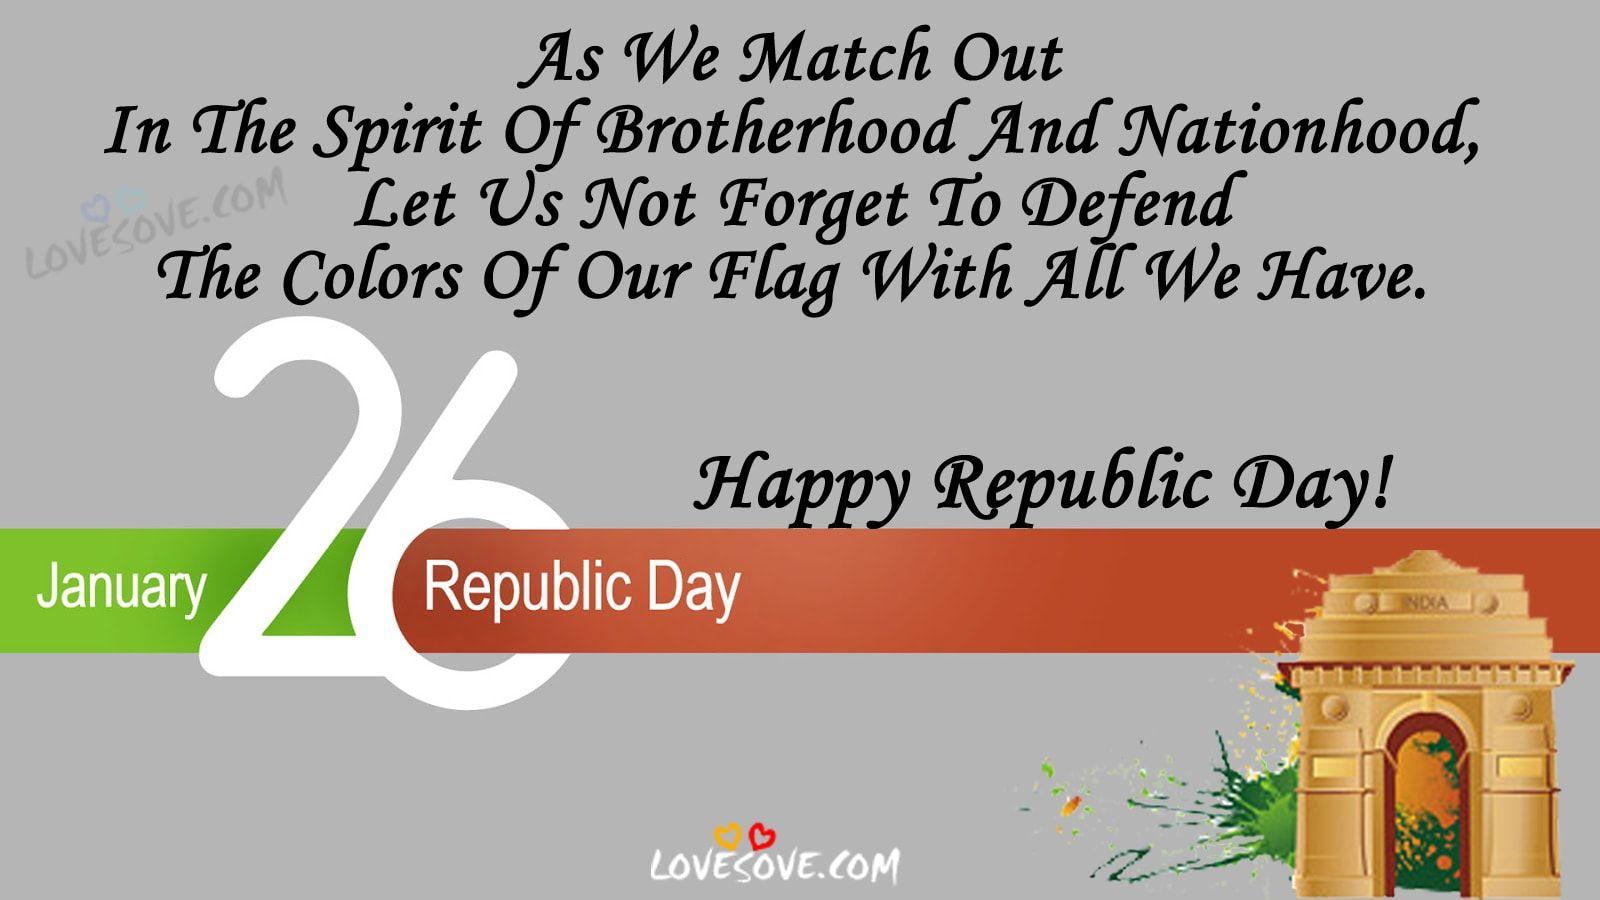 Happy Republic Day 2021 Wishes, Quotes, Greetings, Image